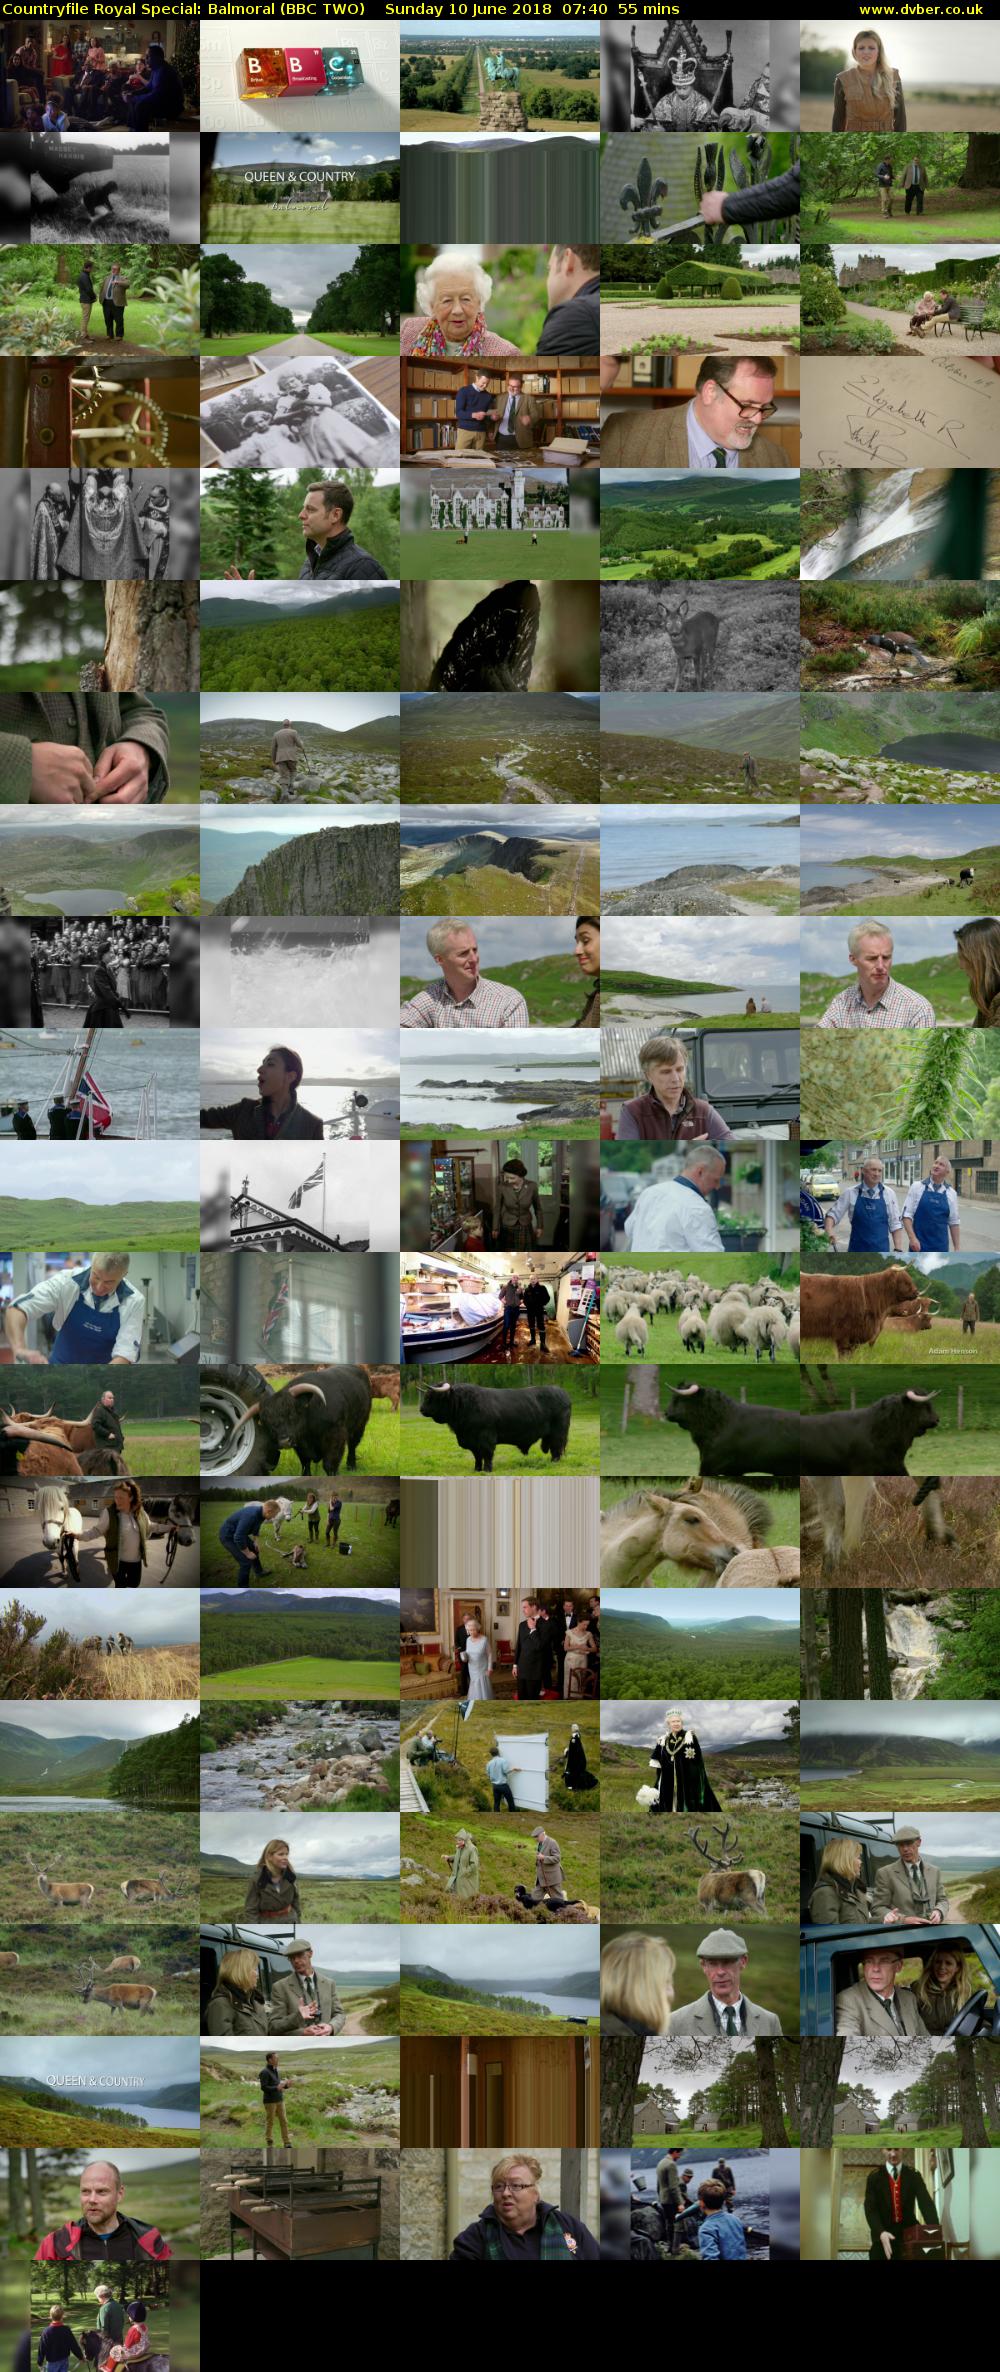 Countryfile Royal Special: Balmoral (BBC TWO) Sunday 10 June 2018 07:40 - 08:35